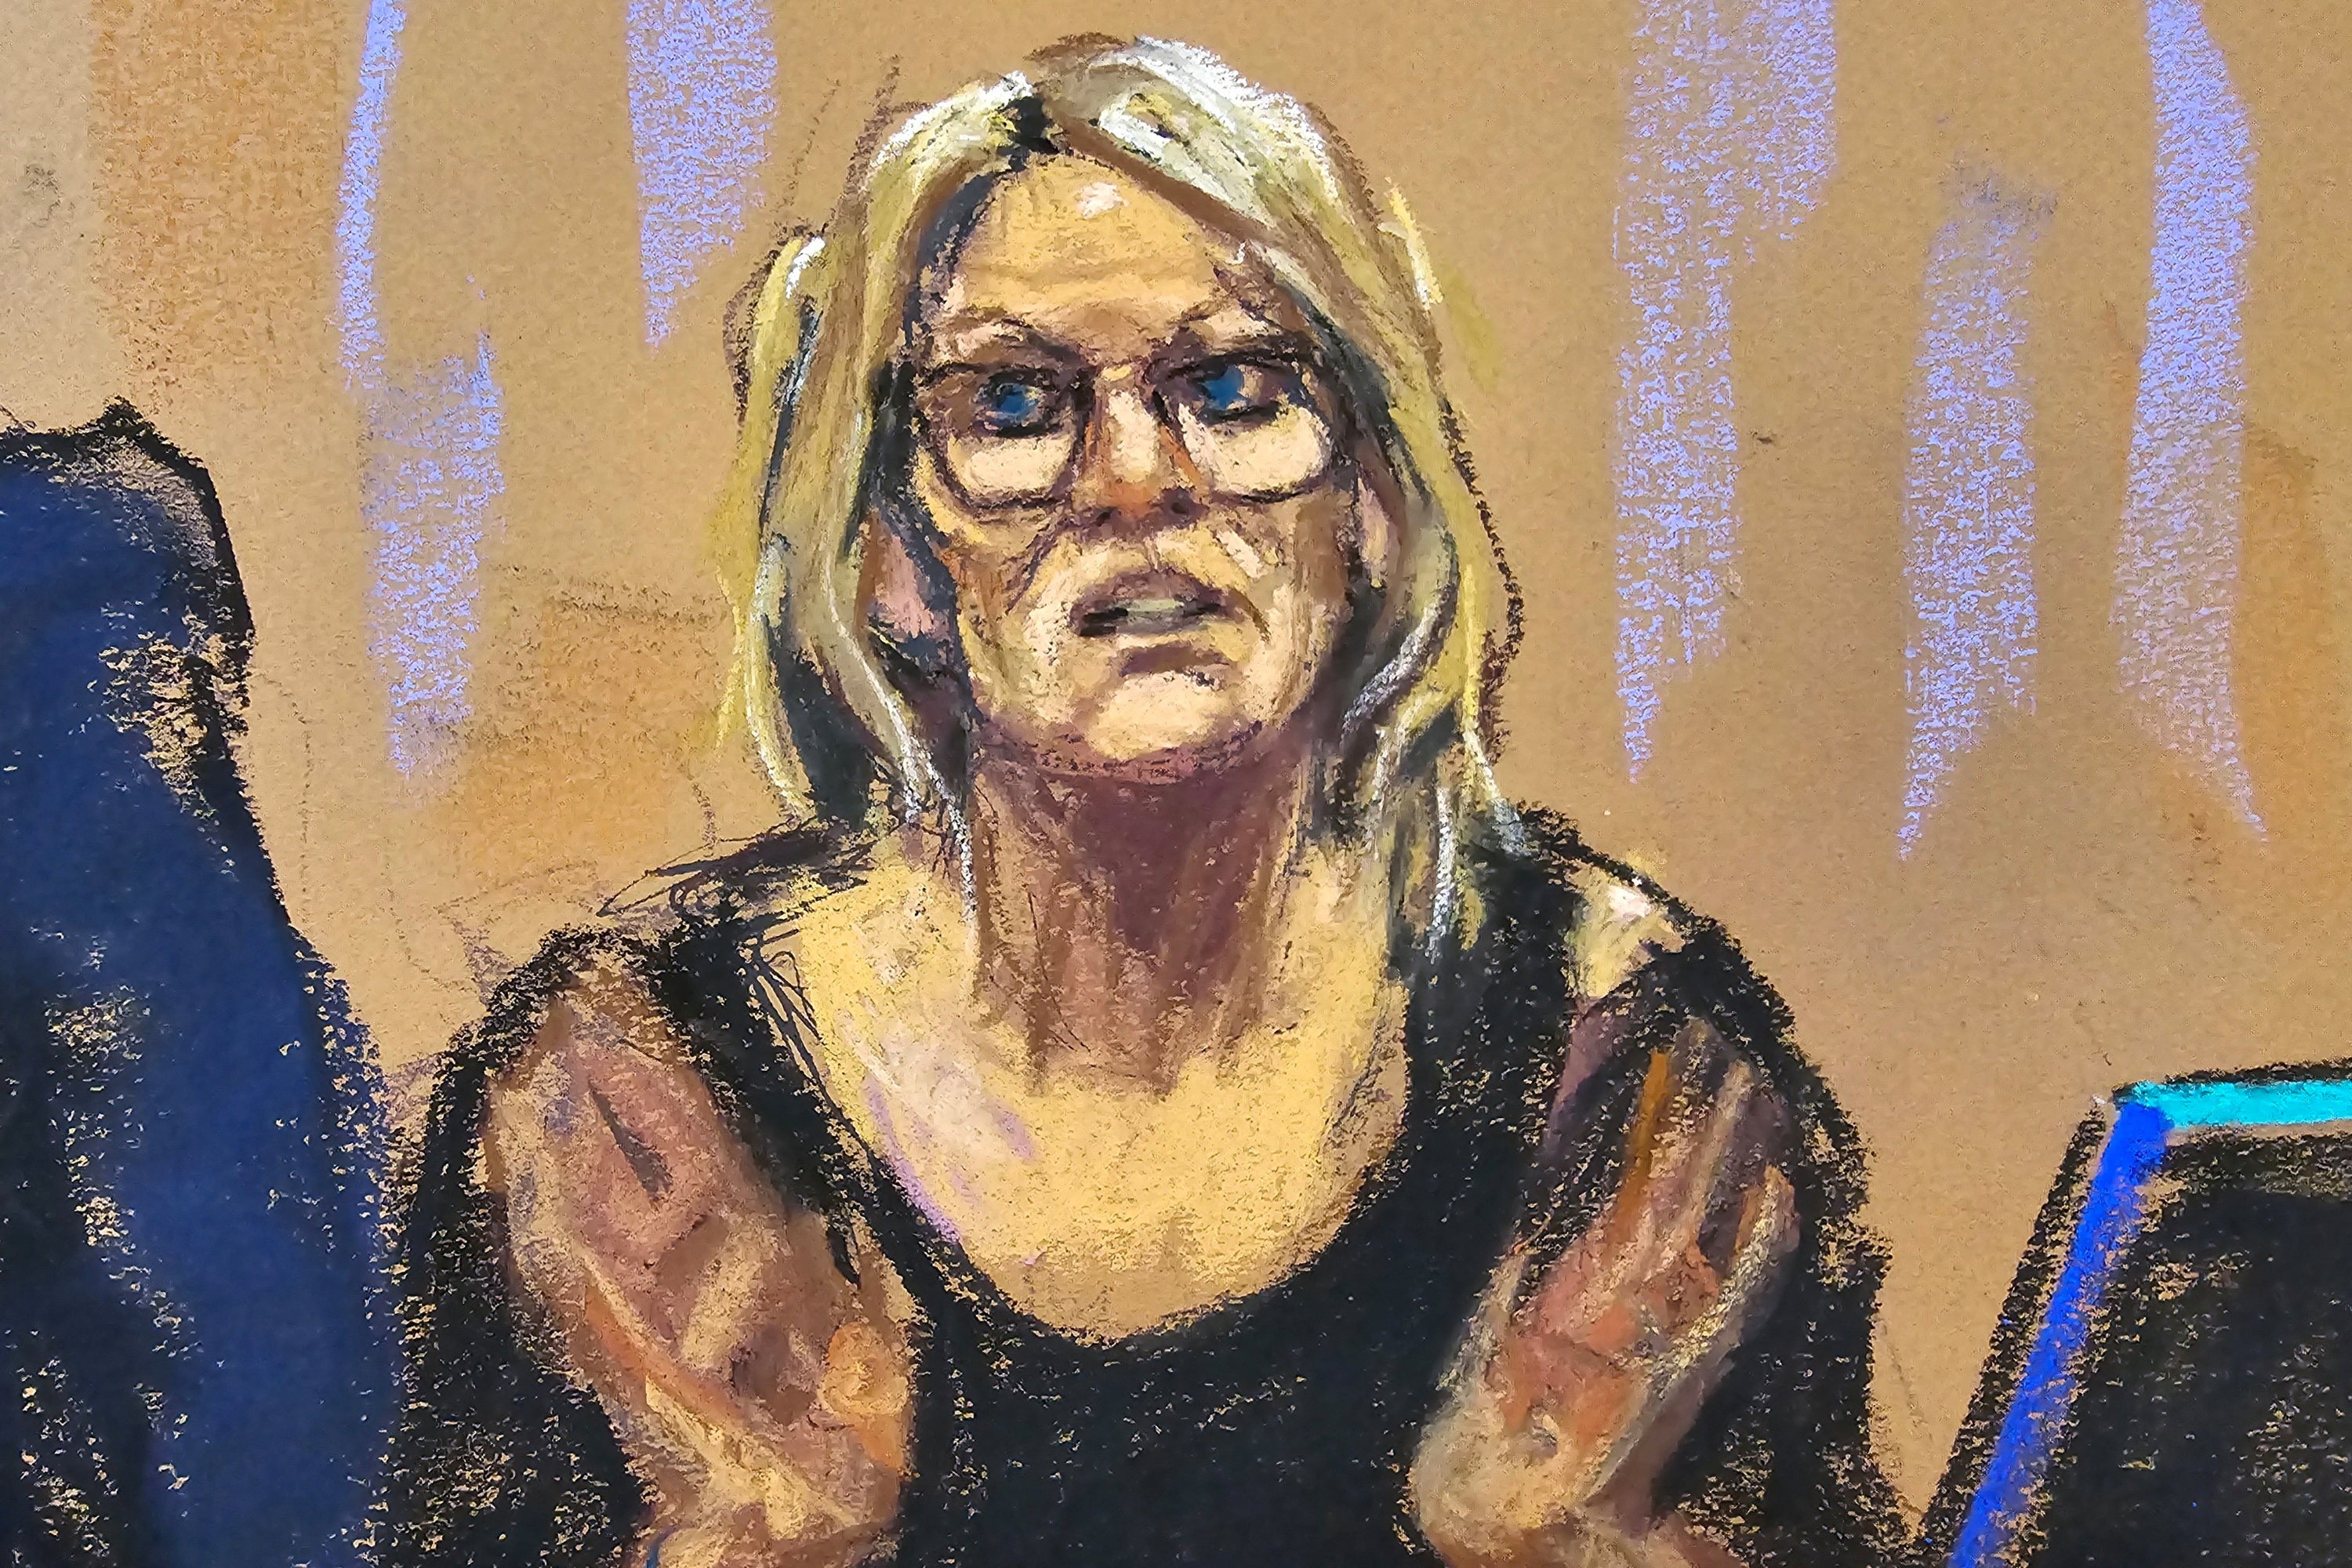 Ms Daniels – a key witness in Donald Trump’s criminal hush money trial – took the stand in New York on Tuesday, as testimony enters its third week